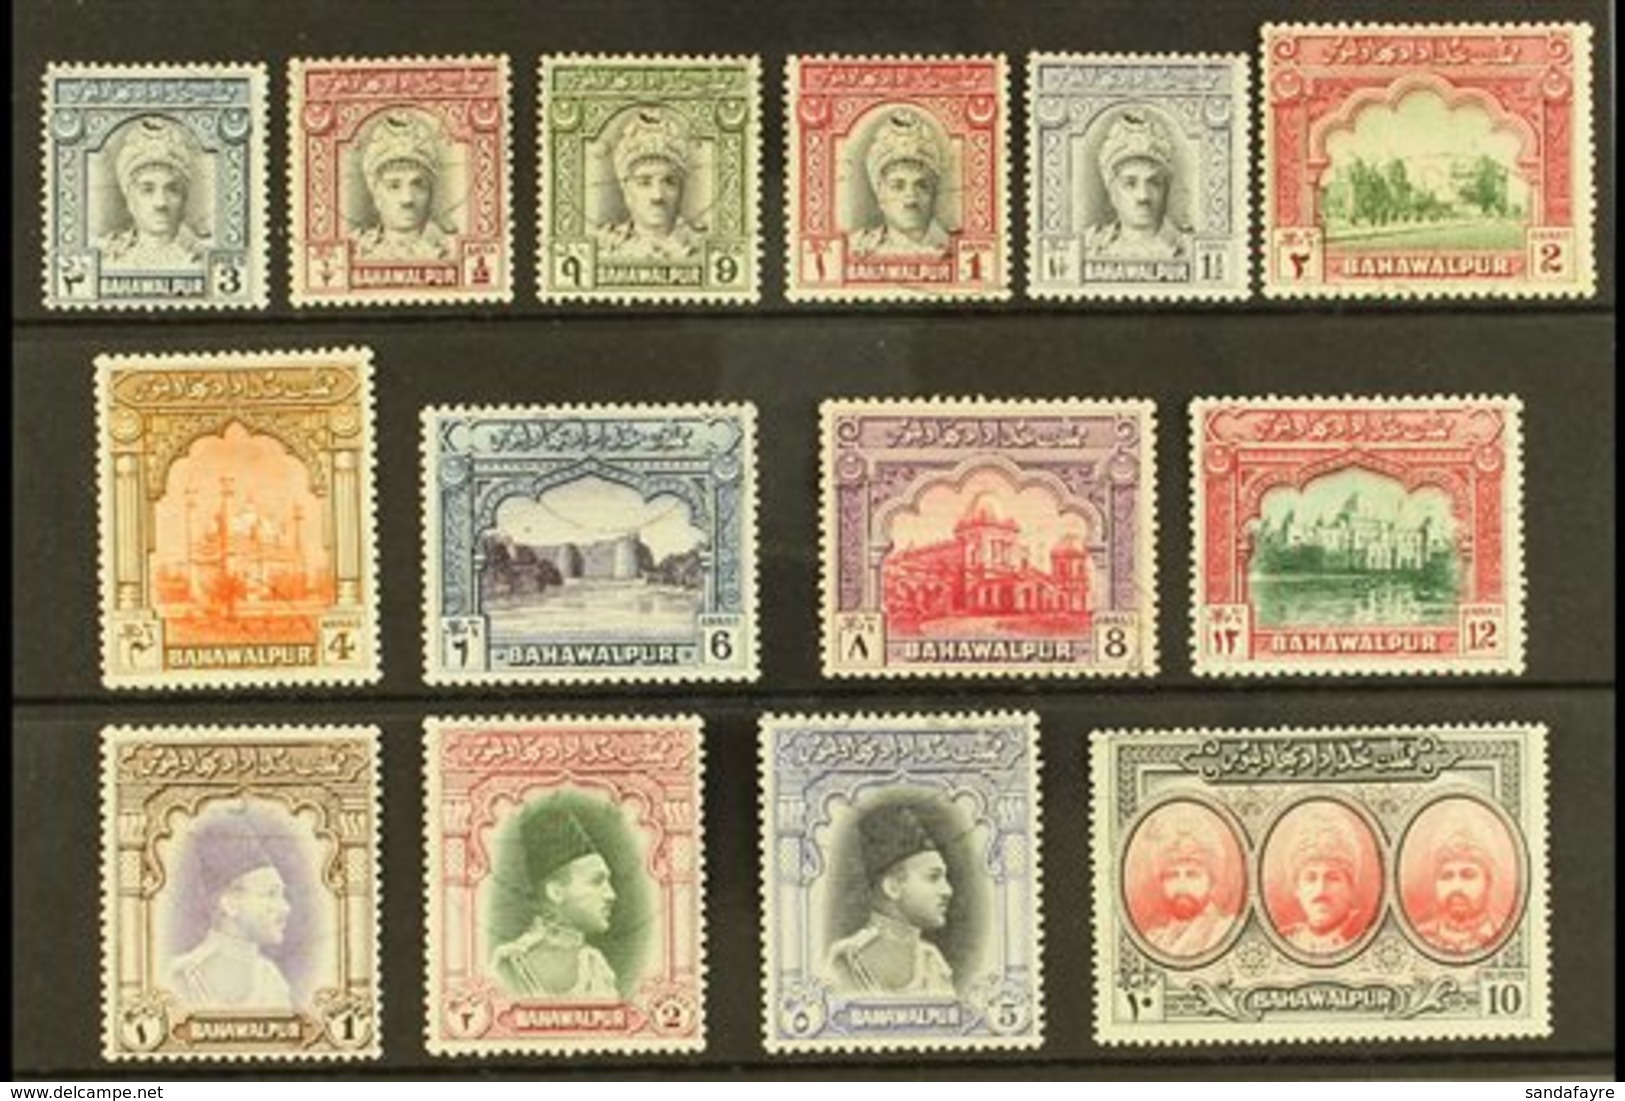 \Y 1948 (1 APR)\Y Complete Pictorial Definitive Set, SG 19/32, Very Fine Used, A Rare Set As Used. (14 Stamps) For More  - Bahawalpur